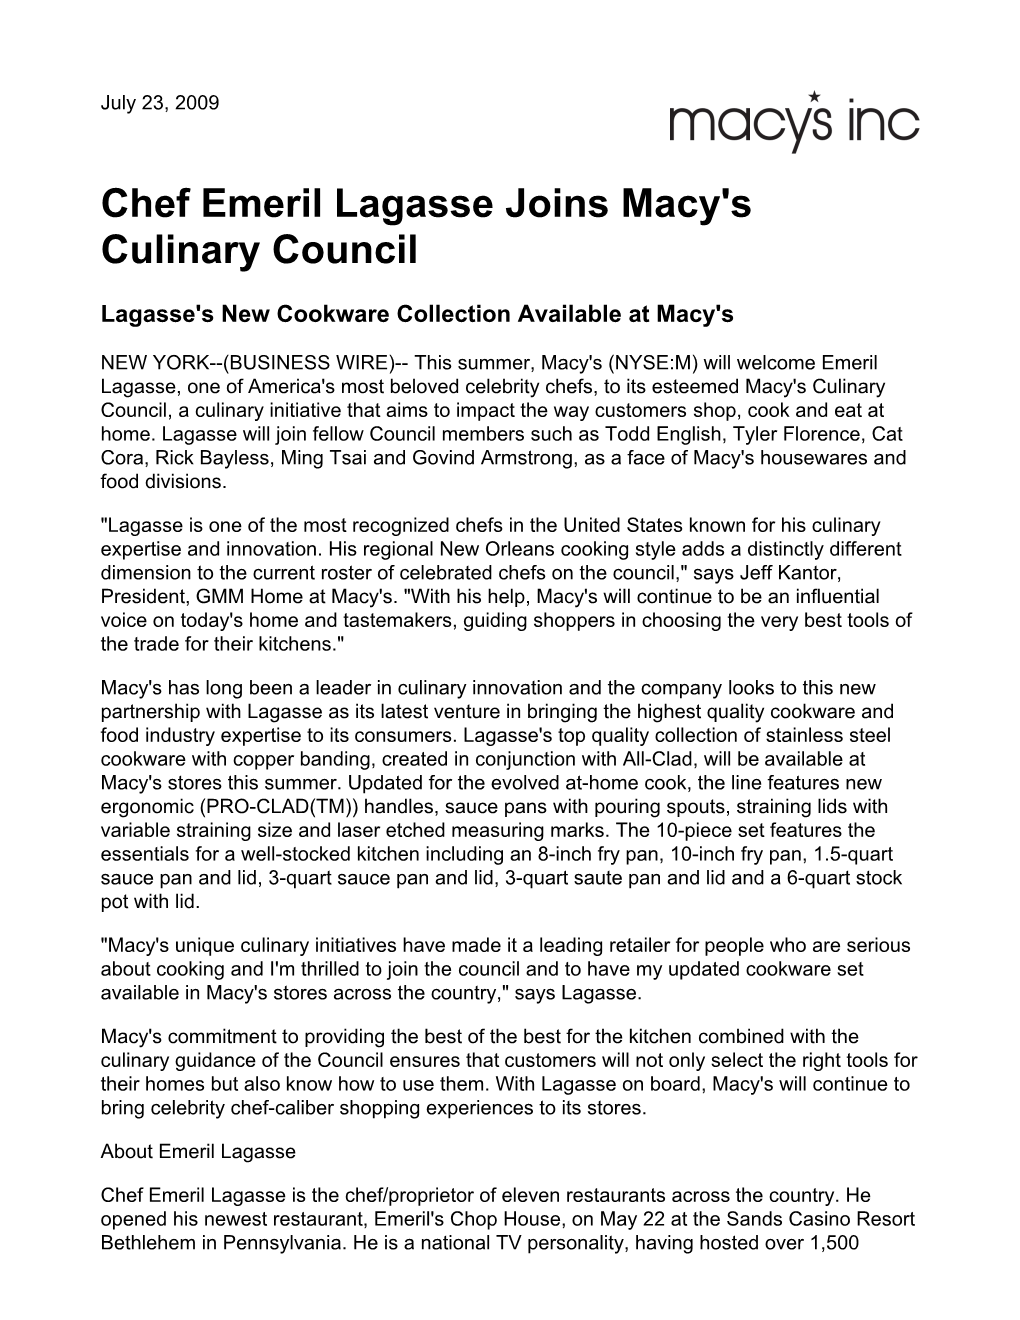 Chef Emeril Lagasse Joins Macy's Culinary Council